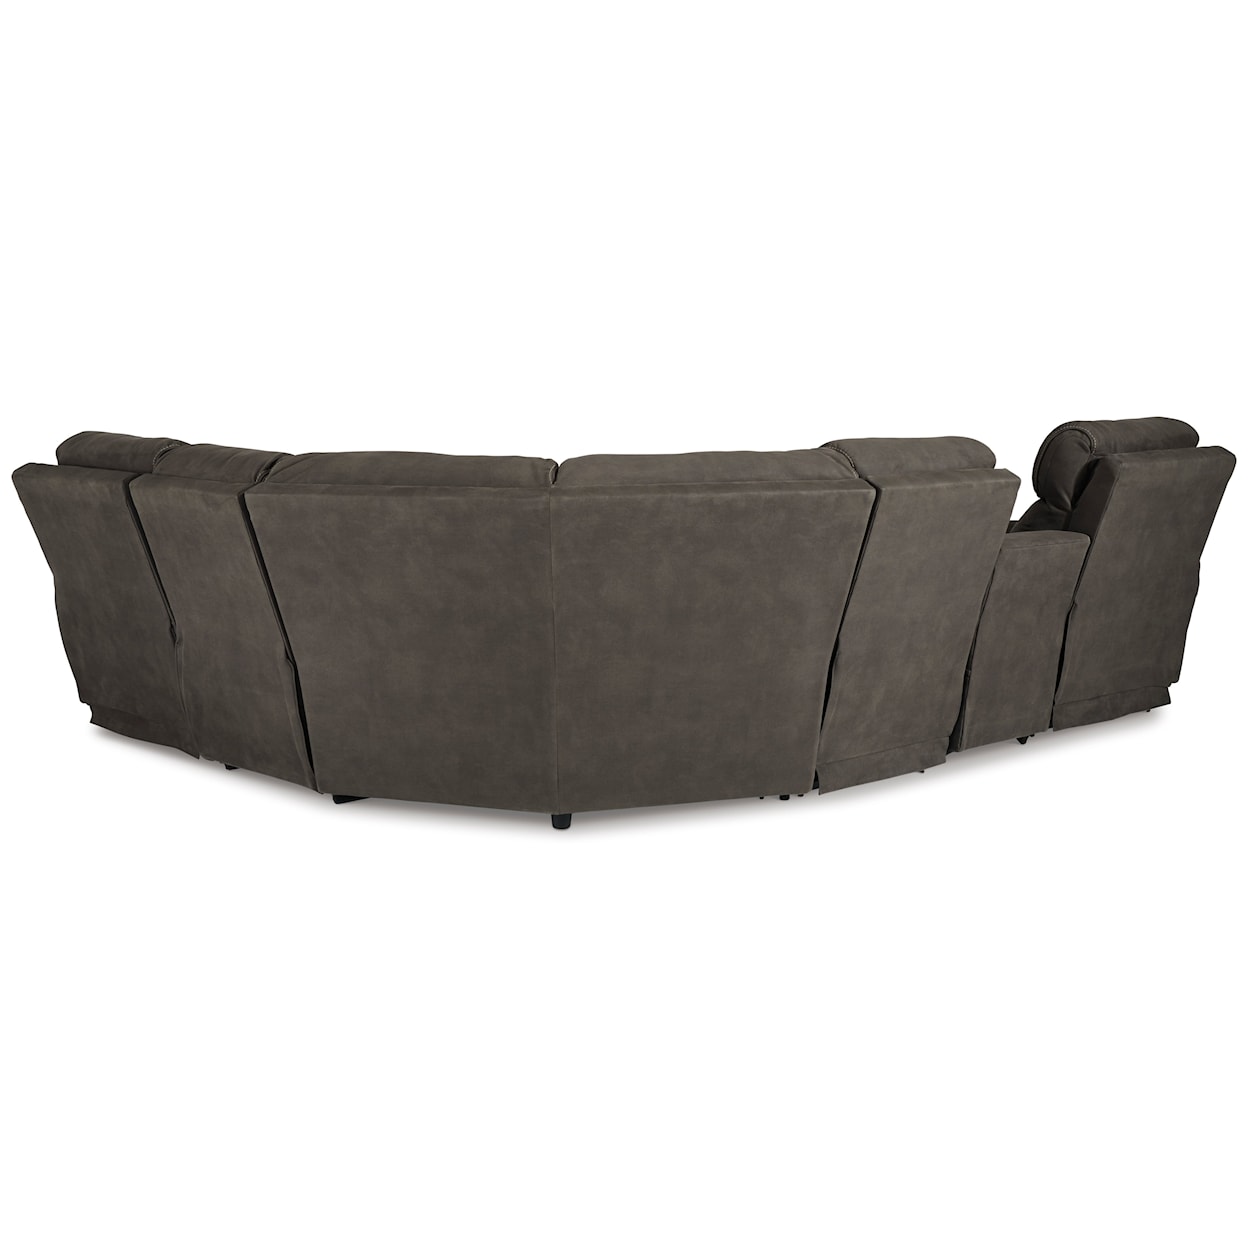 Signature Design by Ashley Hoopster Sectional Sofa